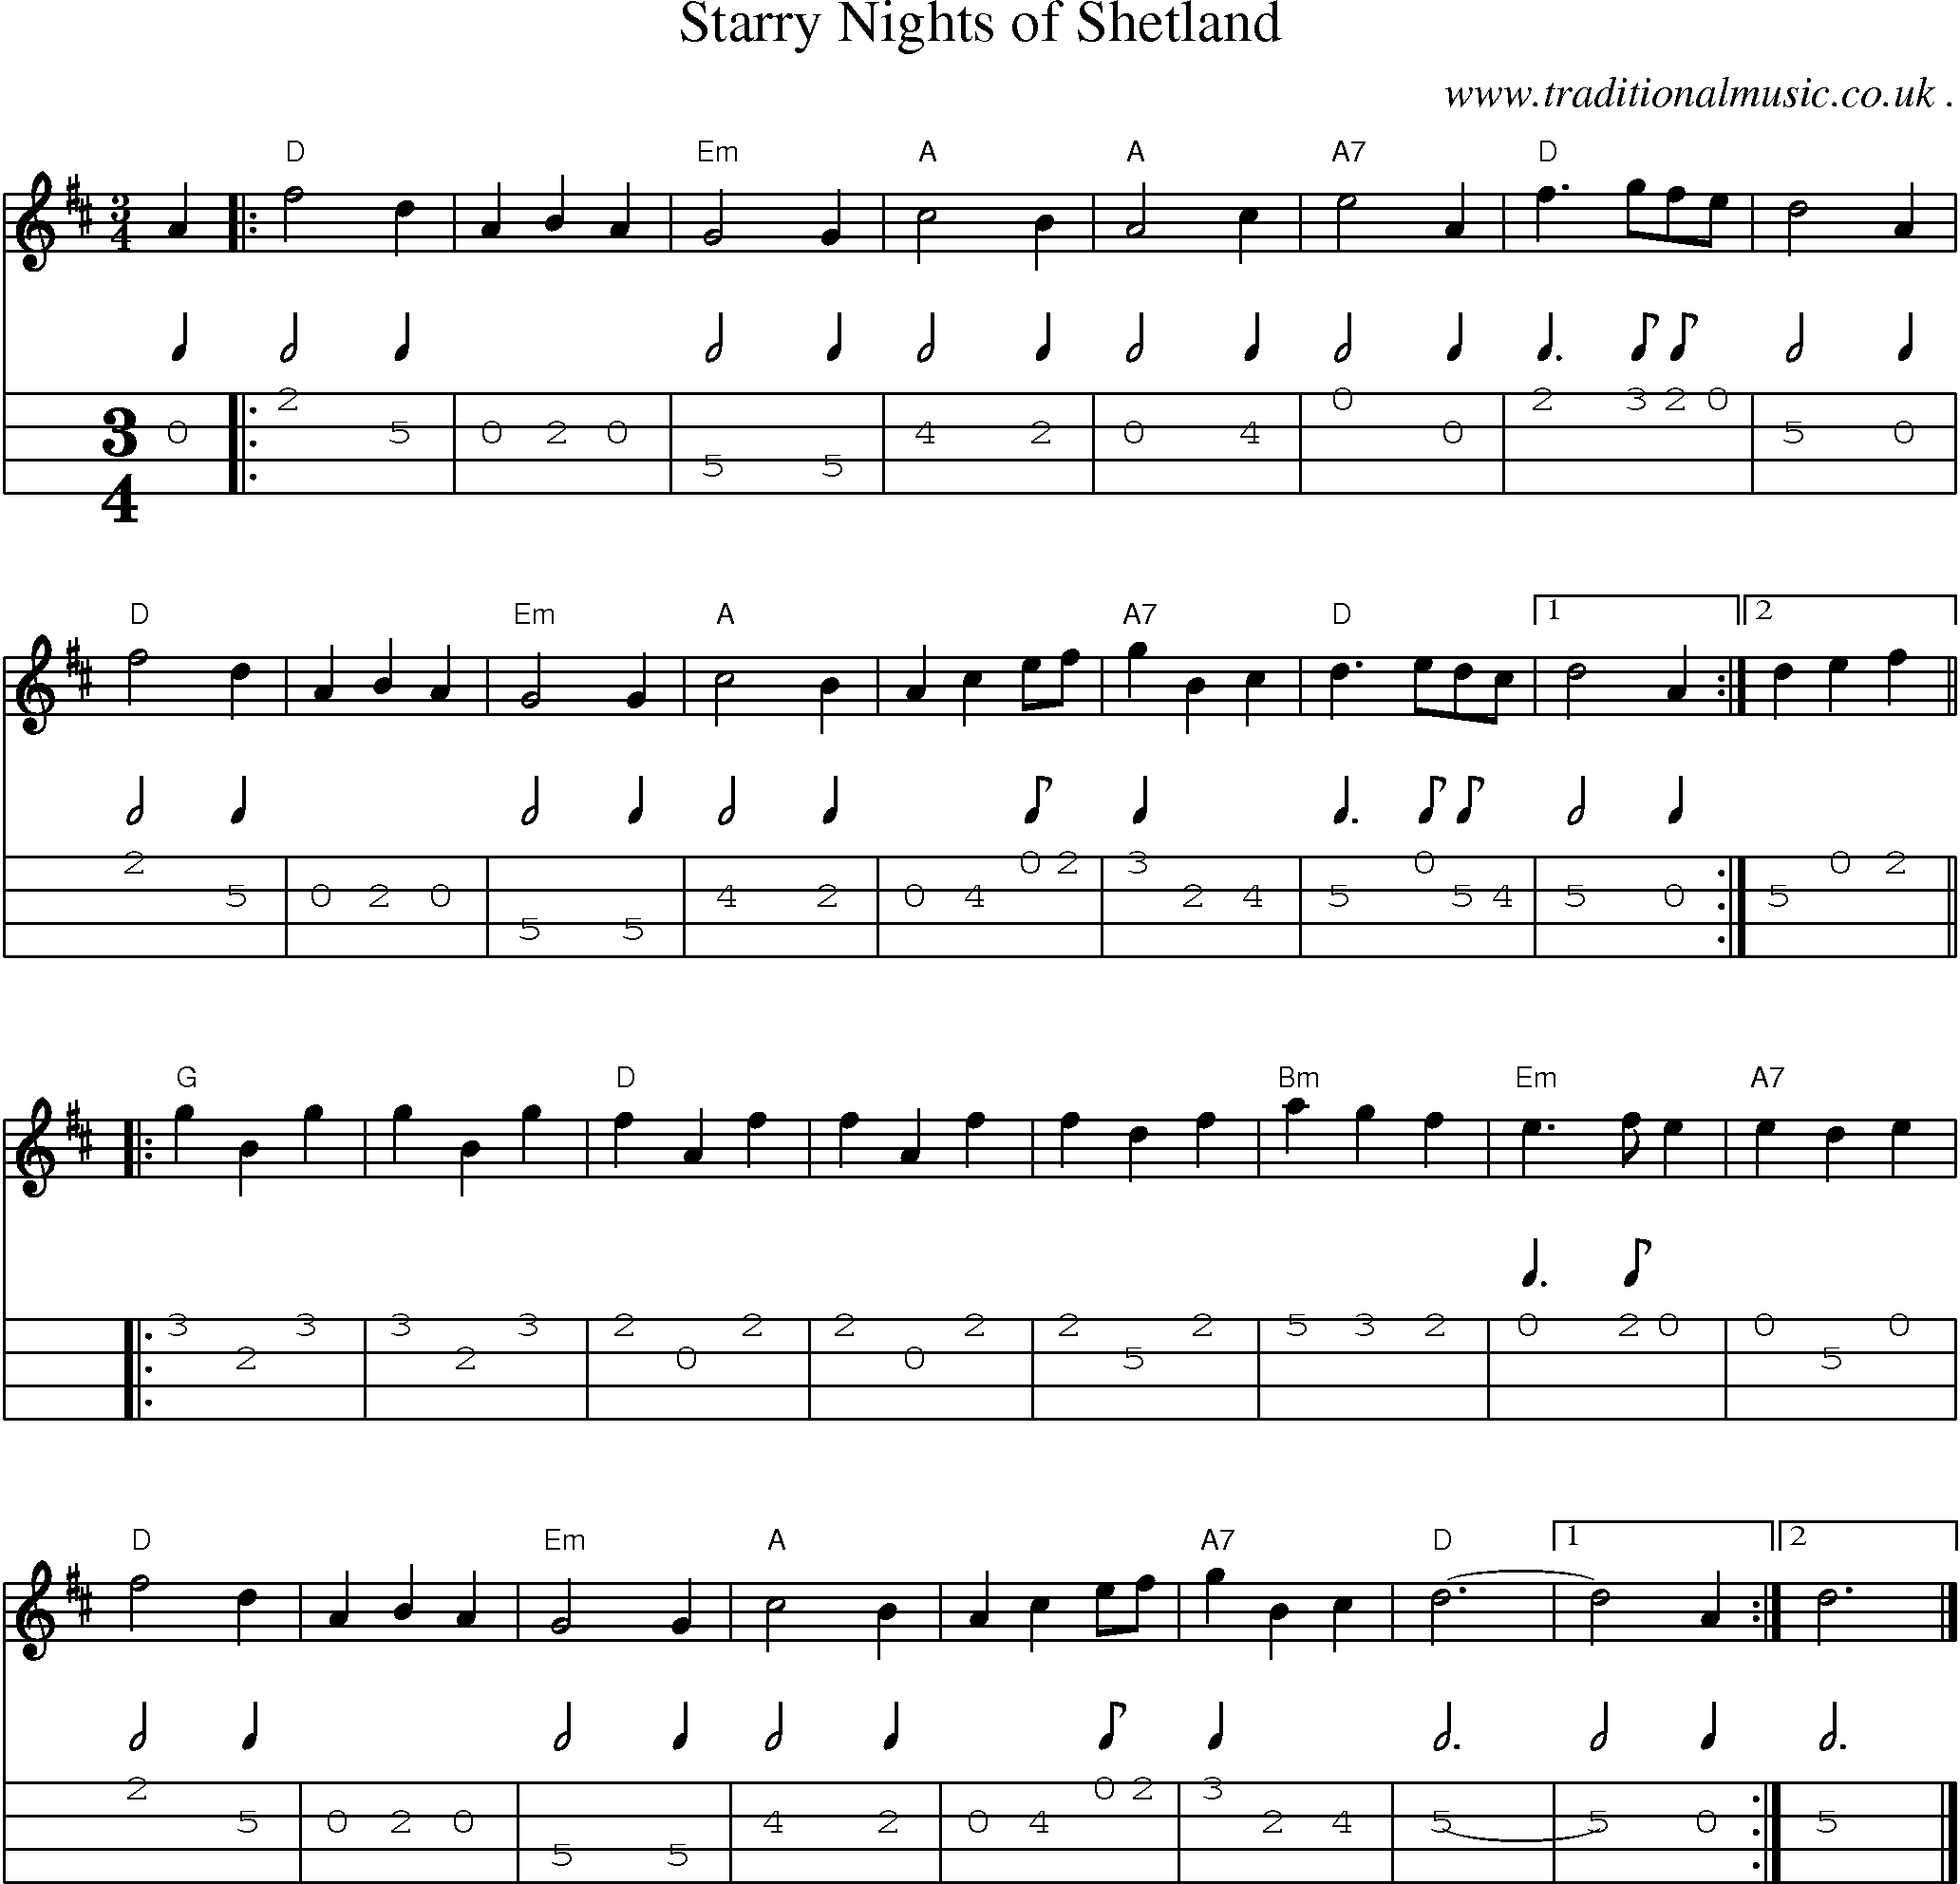 Music Score and Guitar Tabs for Starry Nights of Shetland